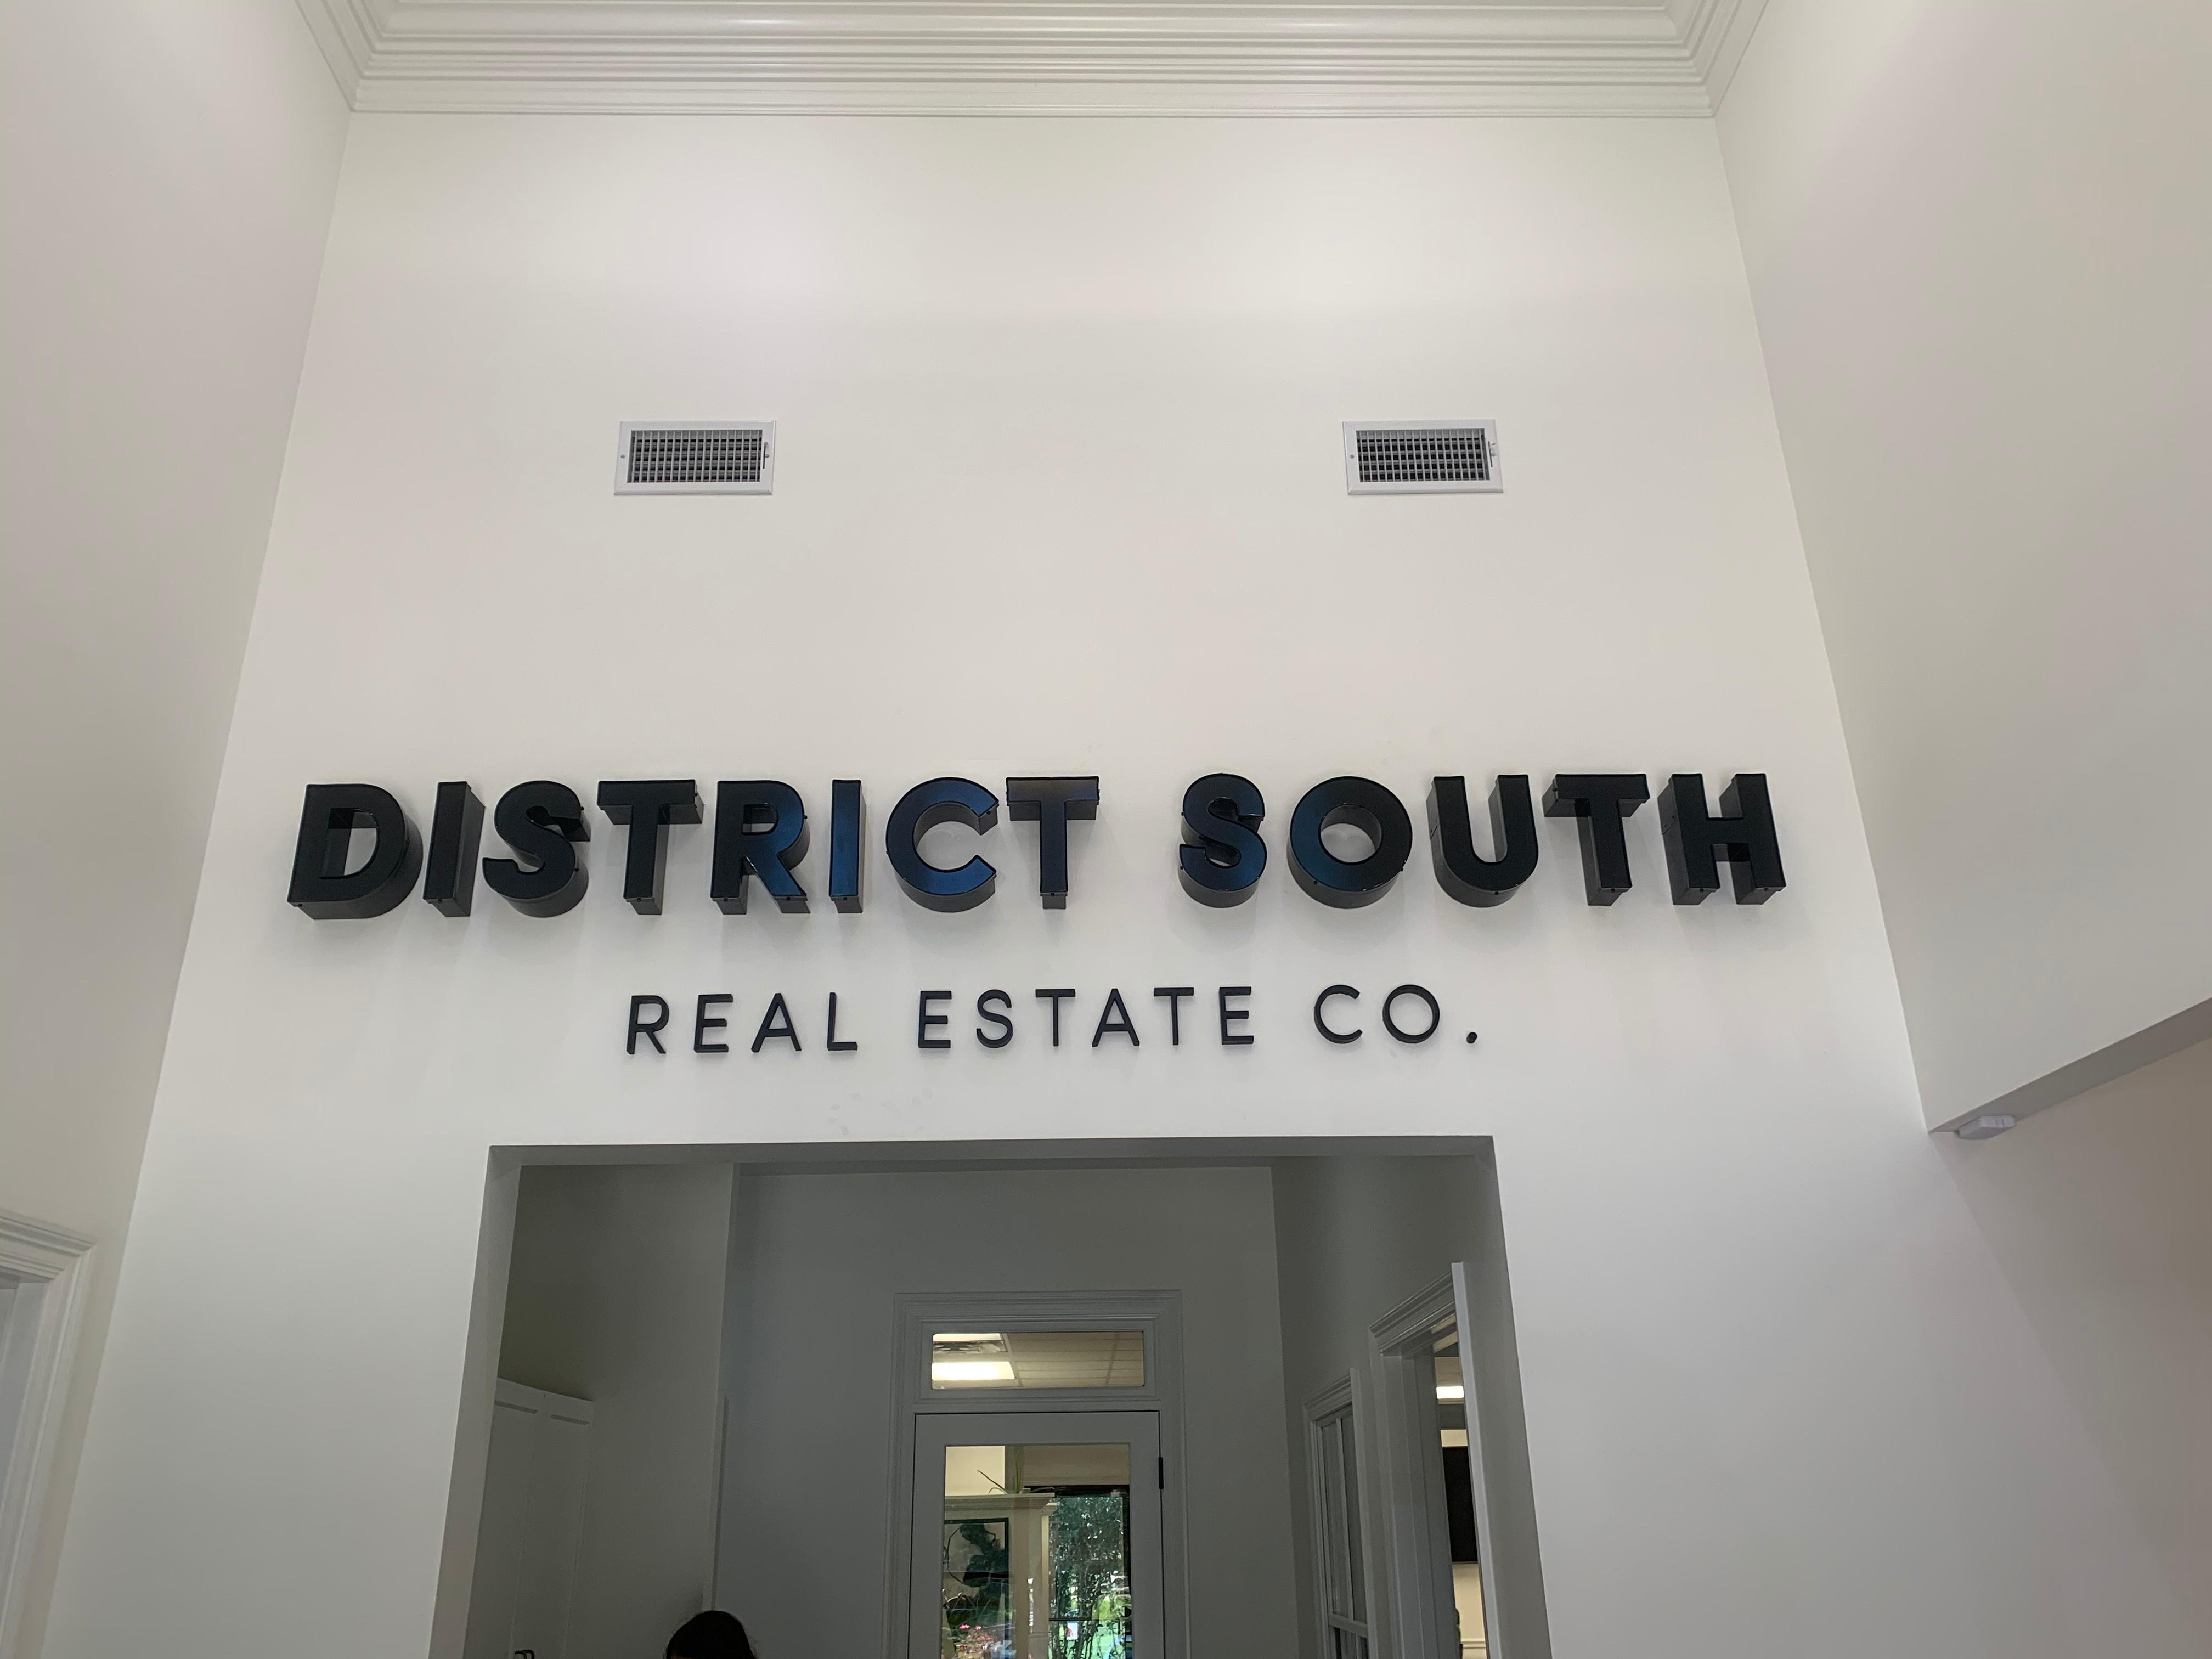 District South sign